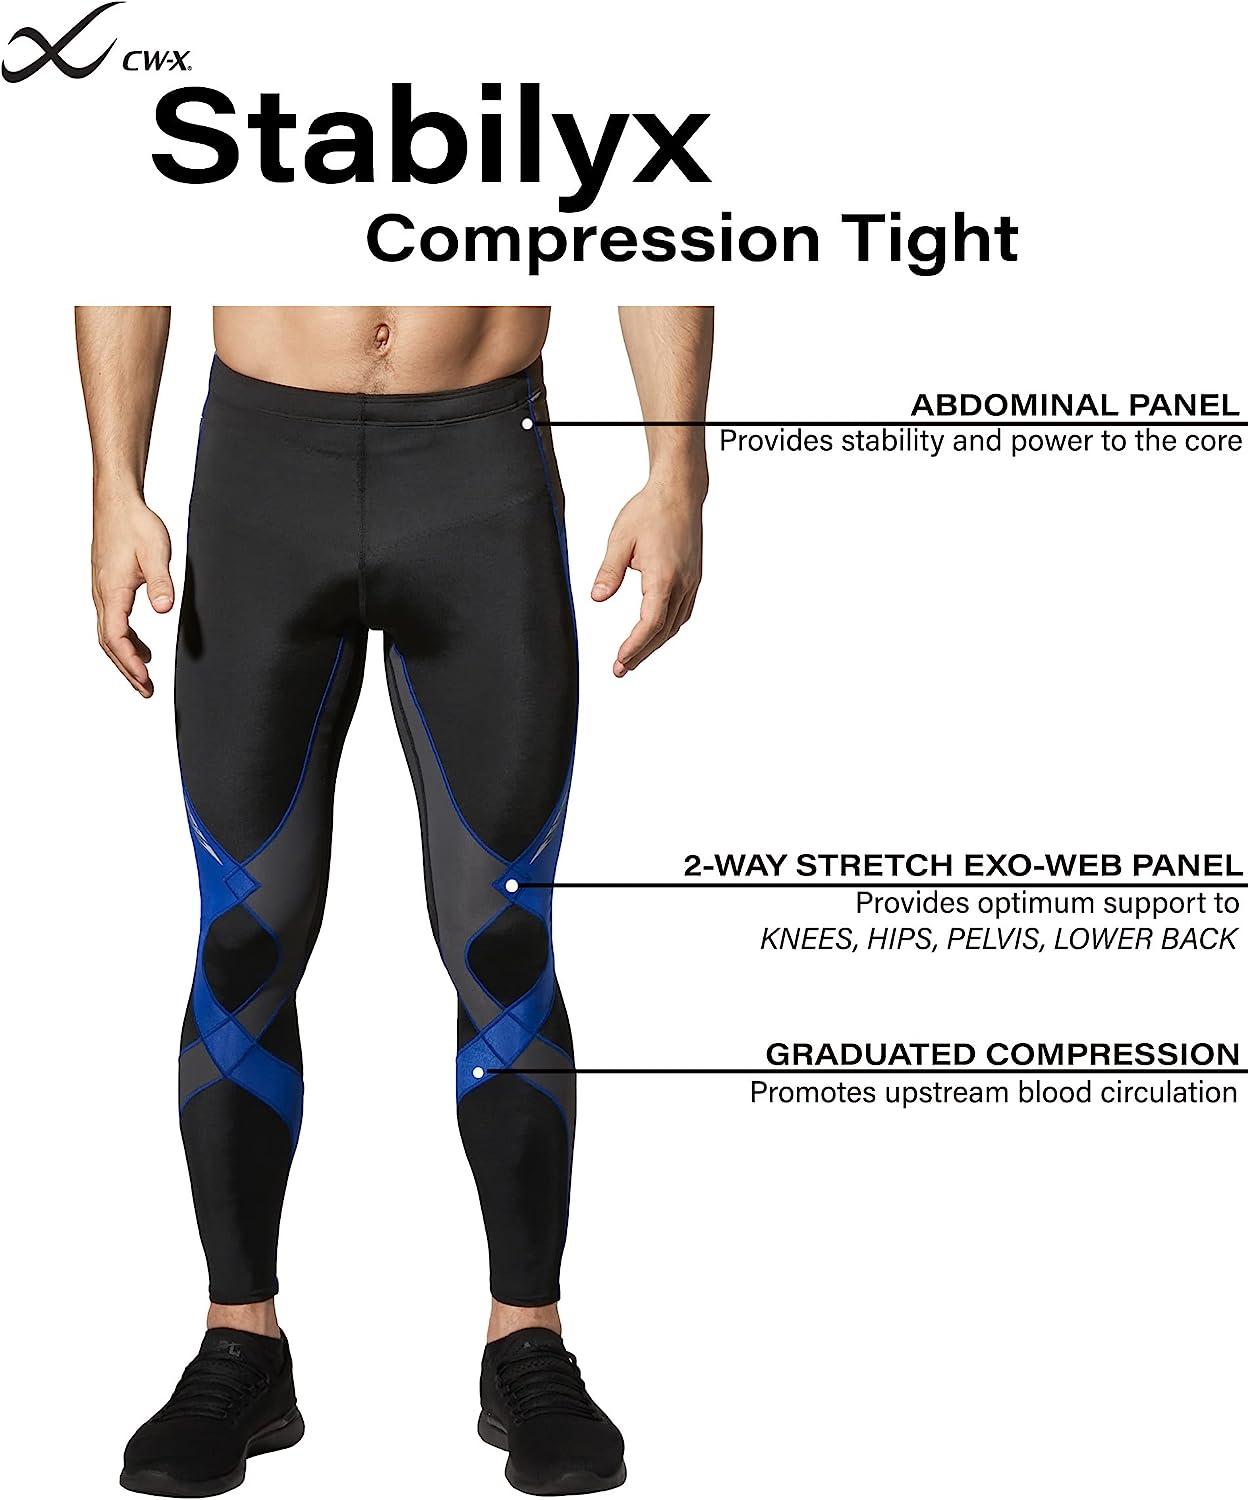 CW-X Womens Leggings STABILYX Joint Support Compression Black White Sz M